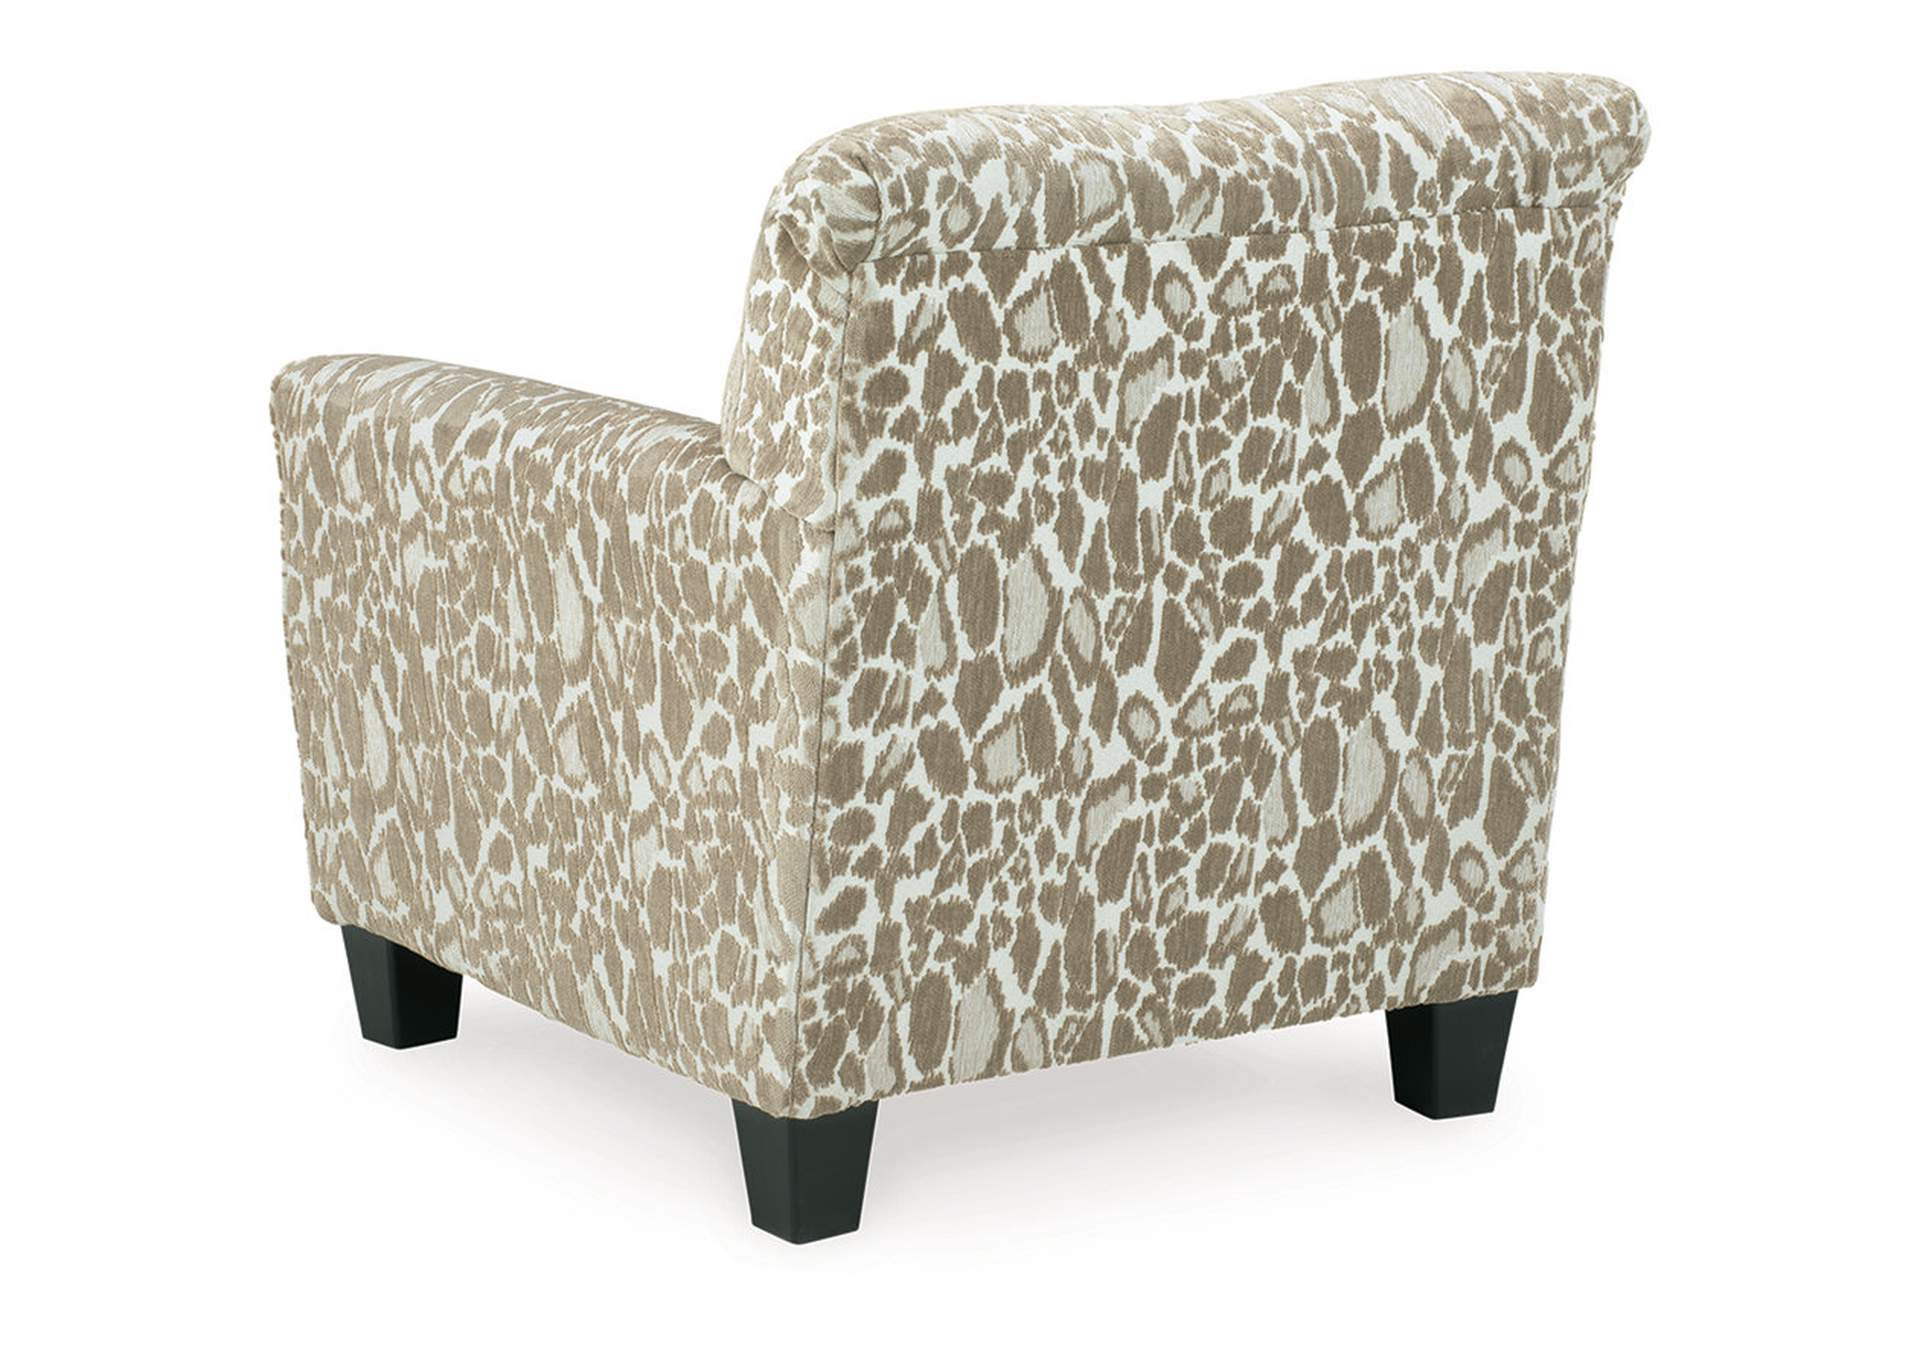 Dovemont Chair and Ottoman,Signature Design By Ashley